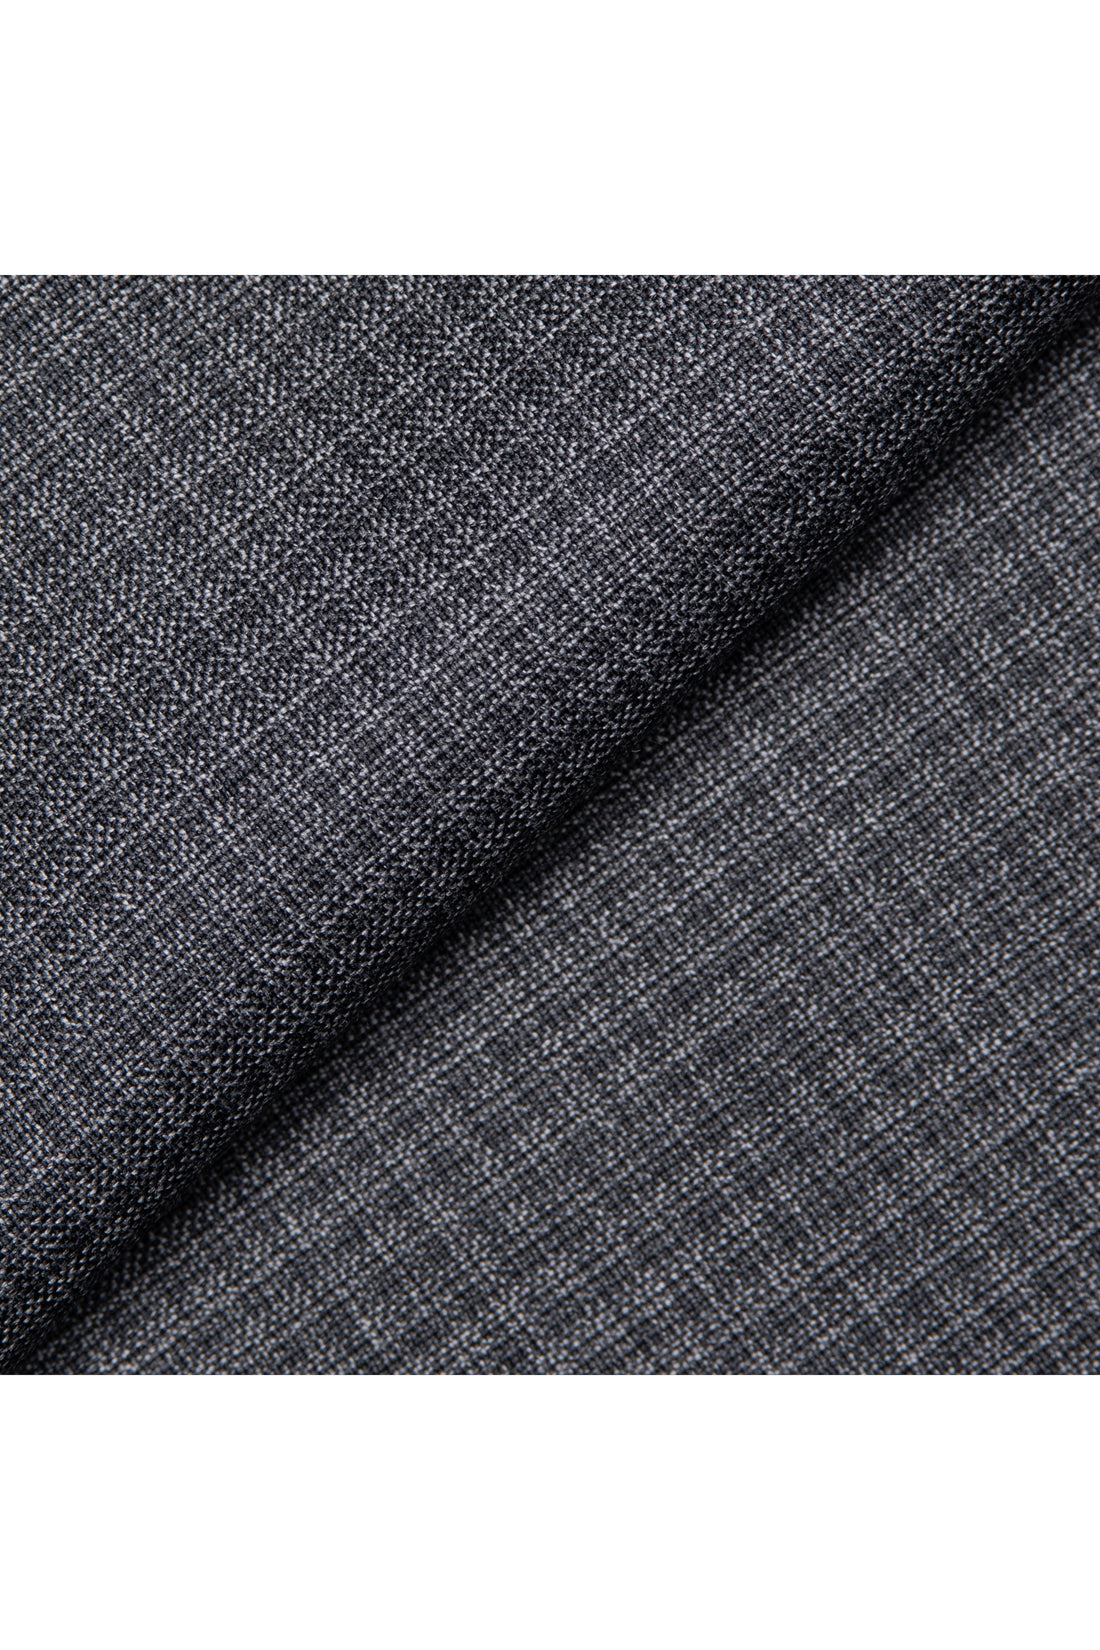 Grey Super 150s Micro Check Suit fabric swatch